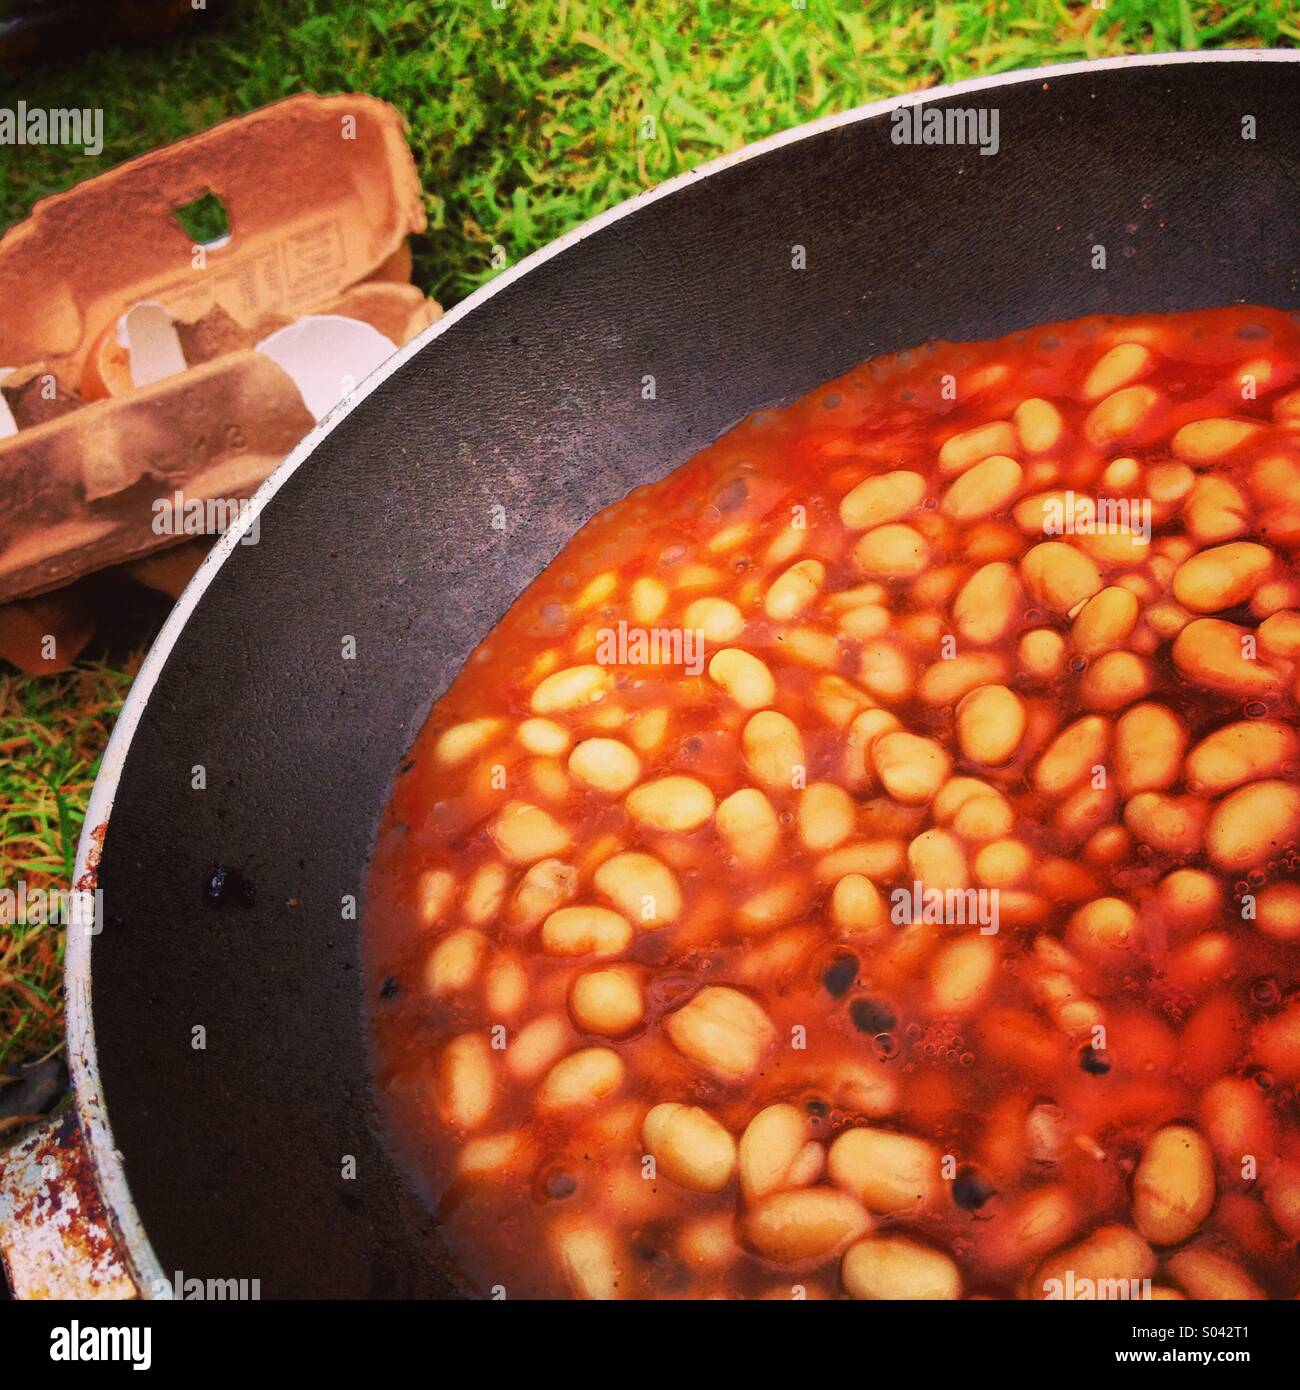 Baked beans being cooked outdoors. Stock Photo